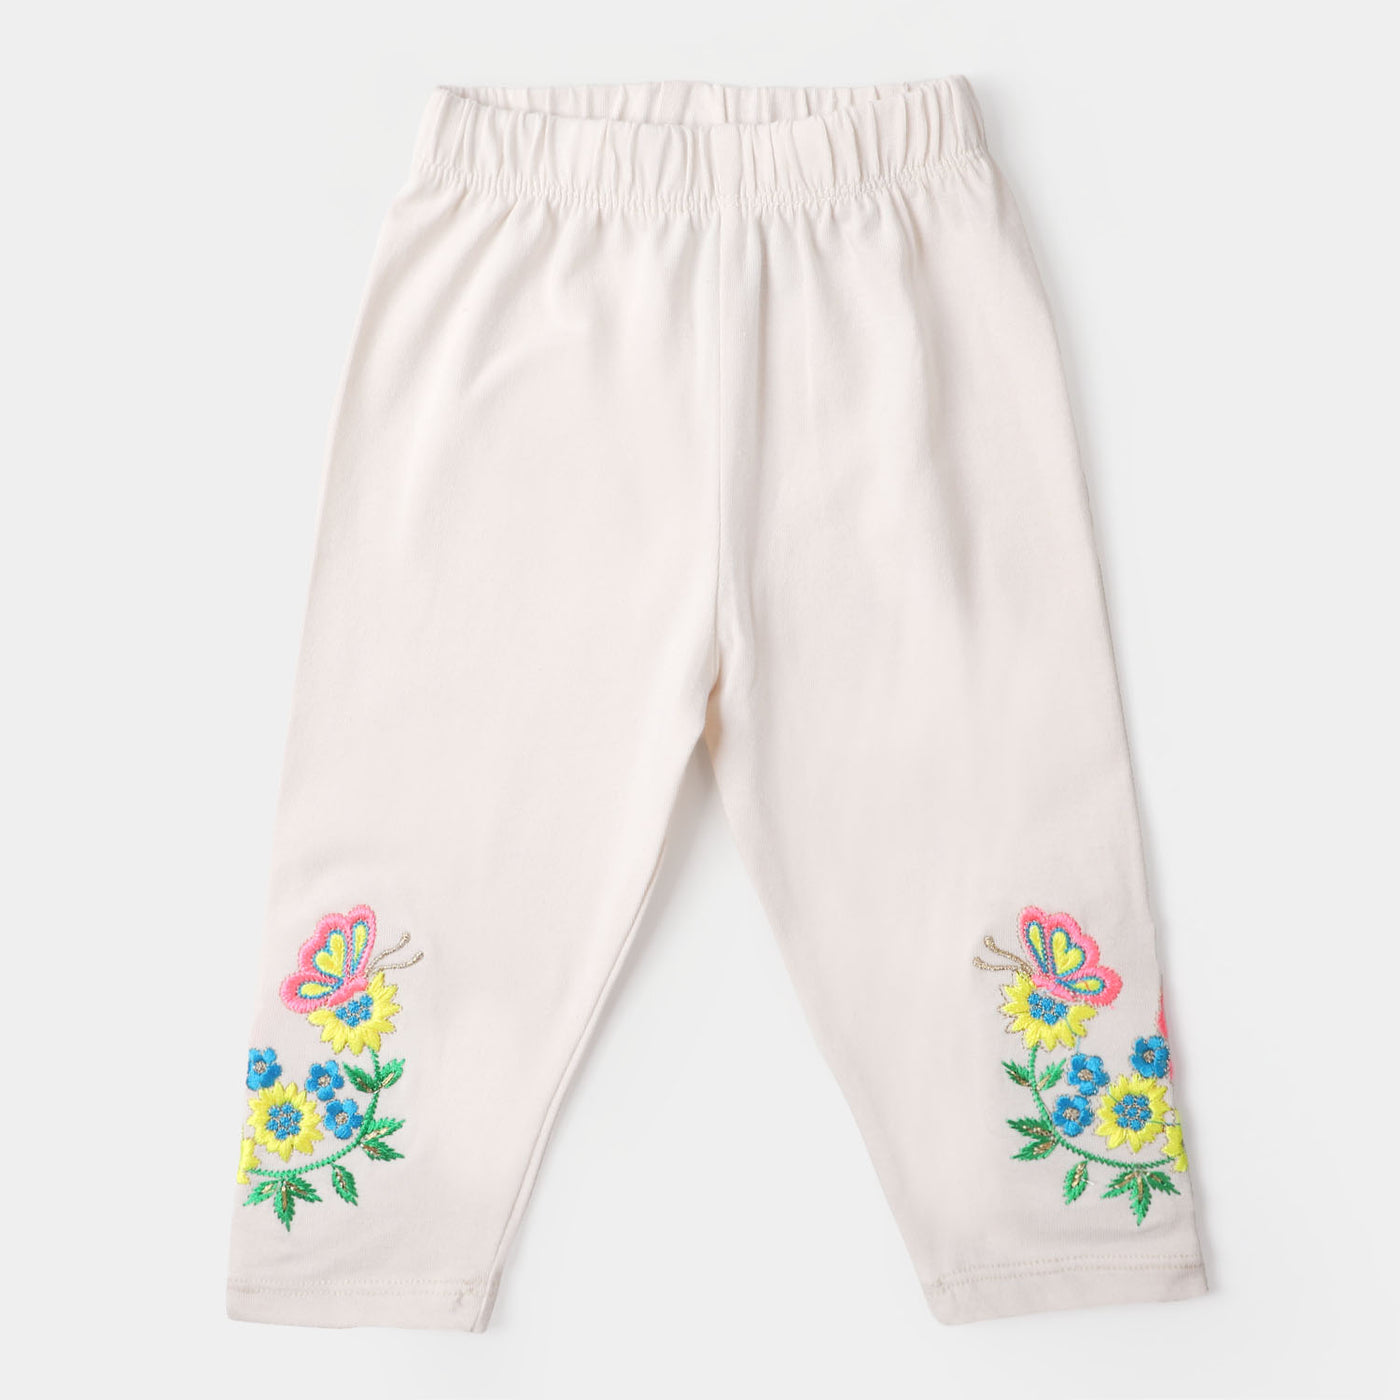 Infant Girls Embroidered Tights Butterfly - Butter Cream